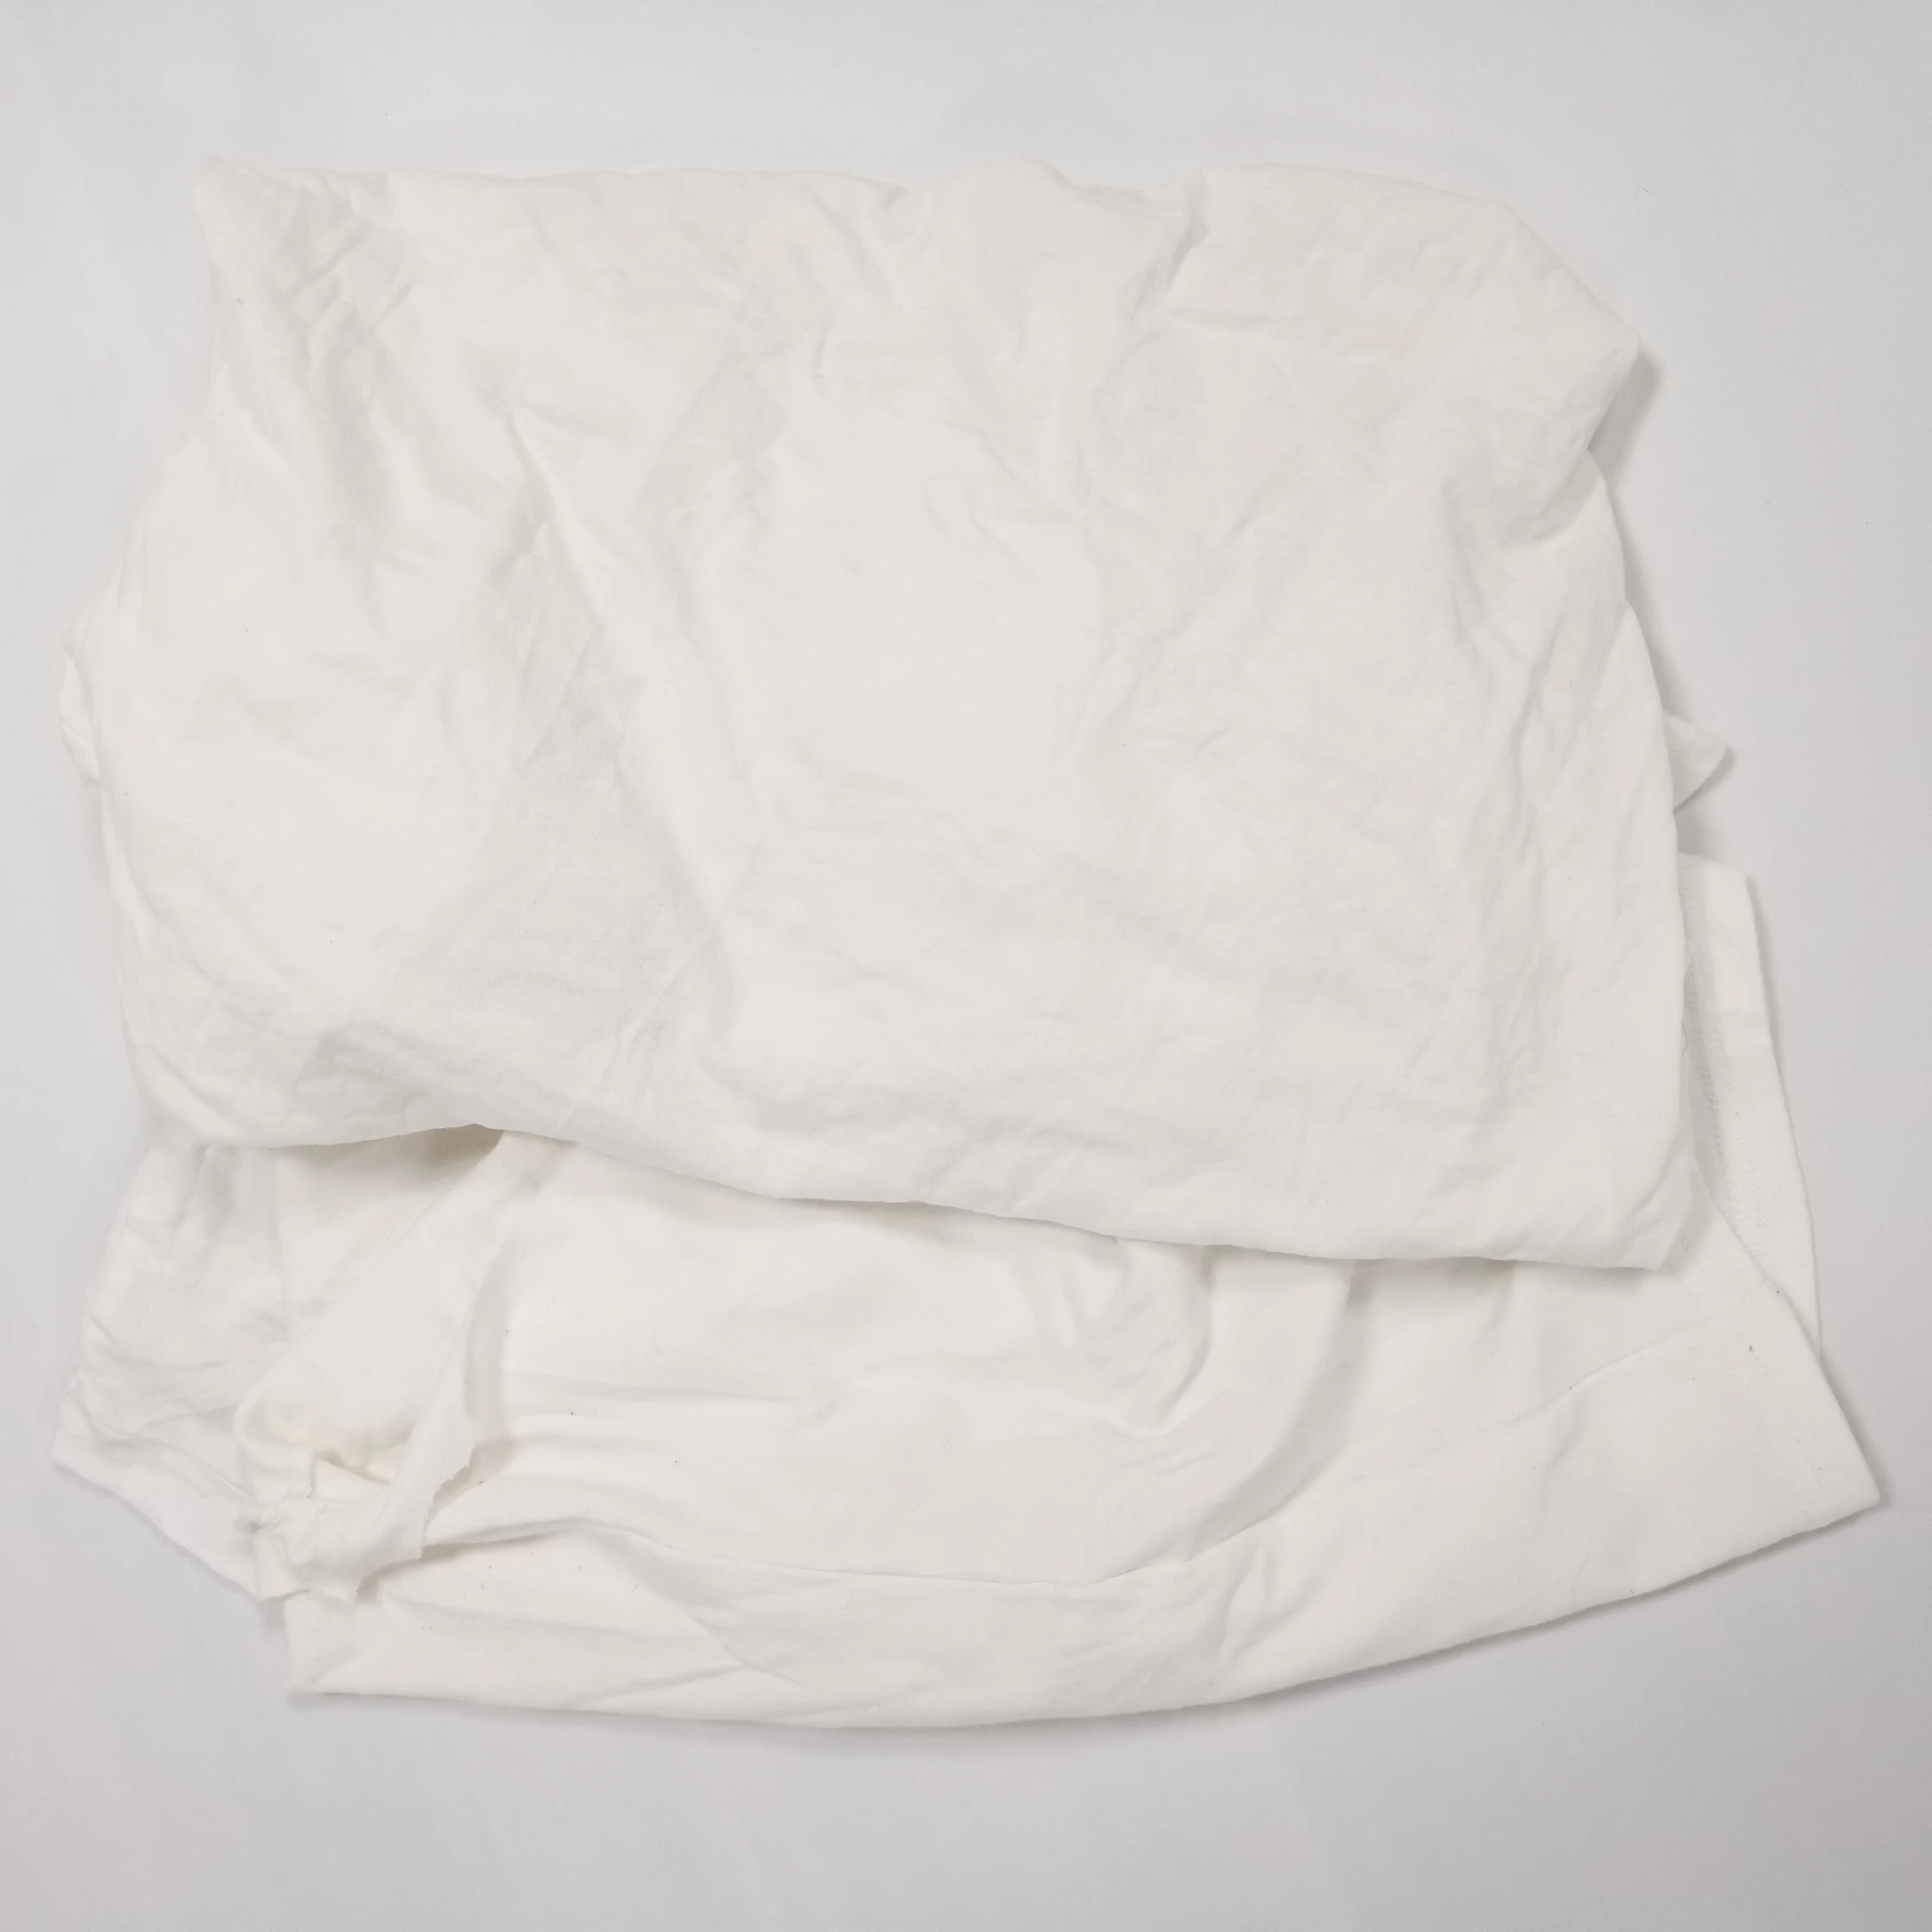 Recycled textile waste 10 kg 25 kg Bale of rags 95% cotton White T-shirt cotton rags